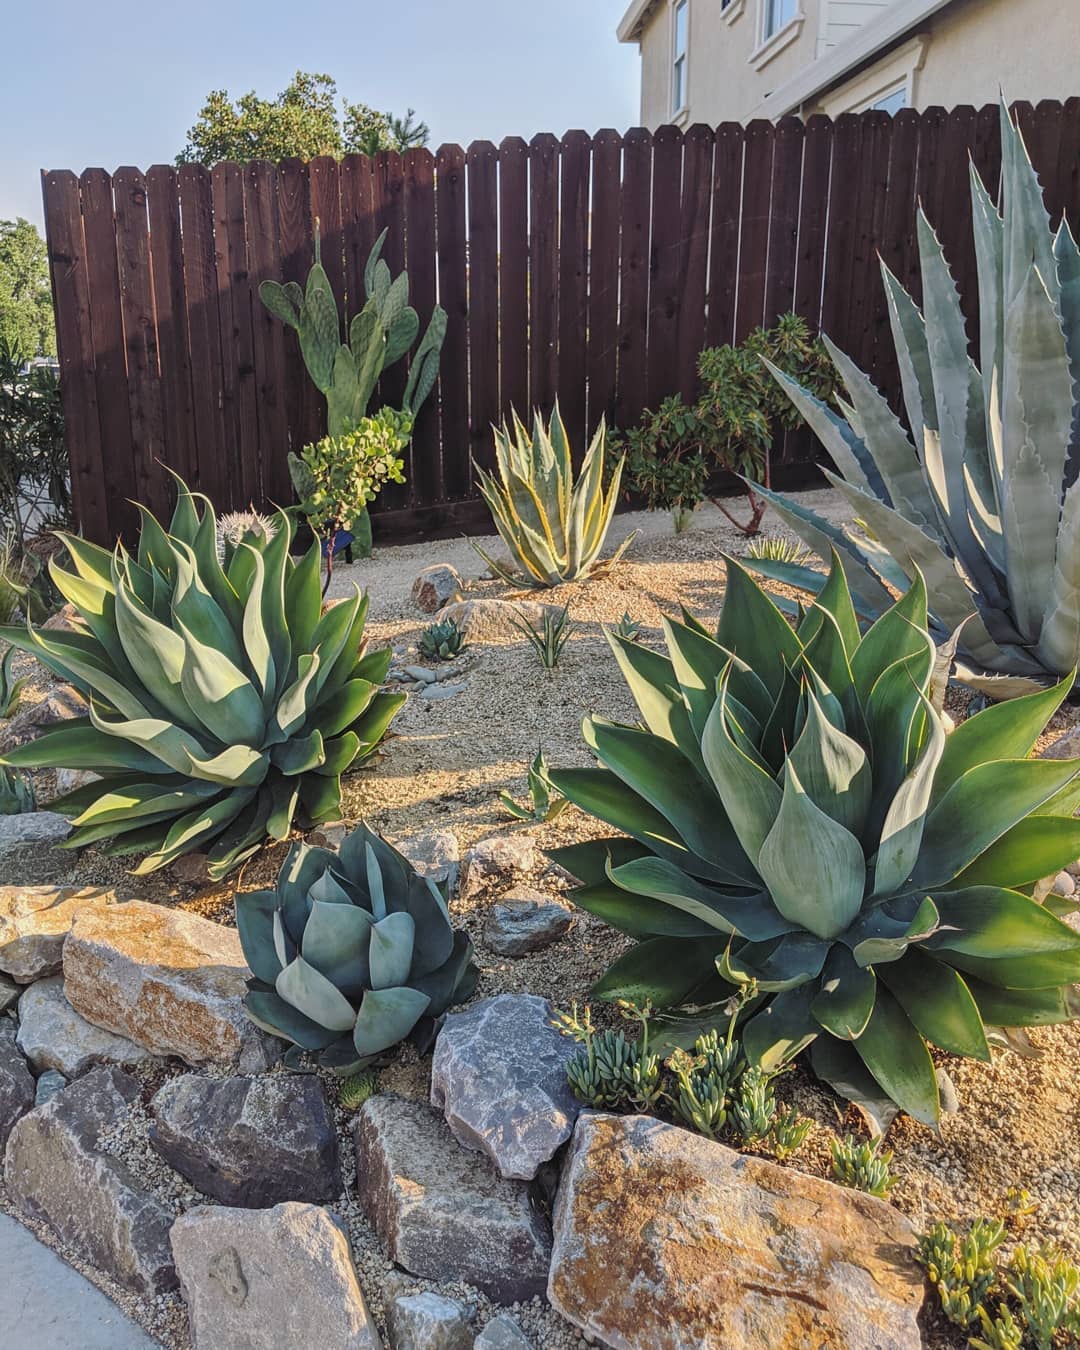 Backyard Xeriscaping with Native Plants. Photo by Instagram user @mr_agave